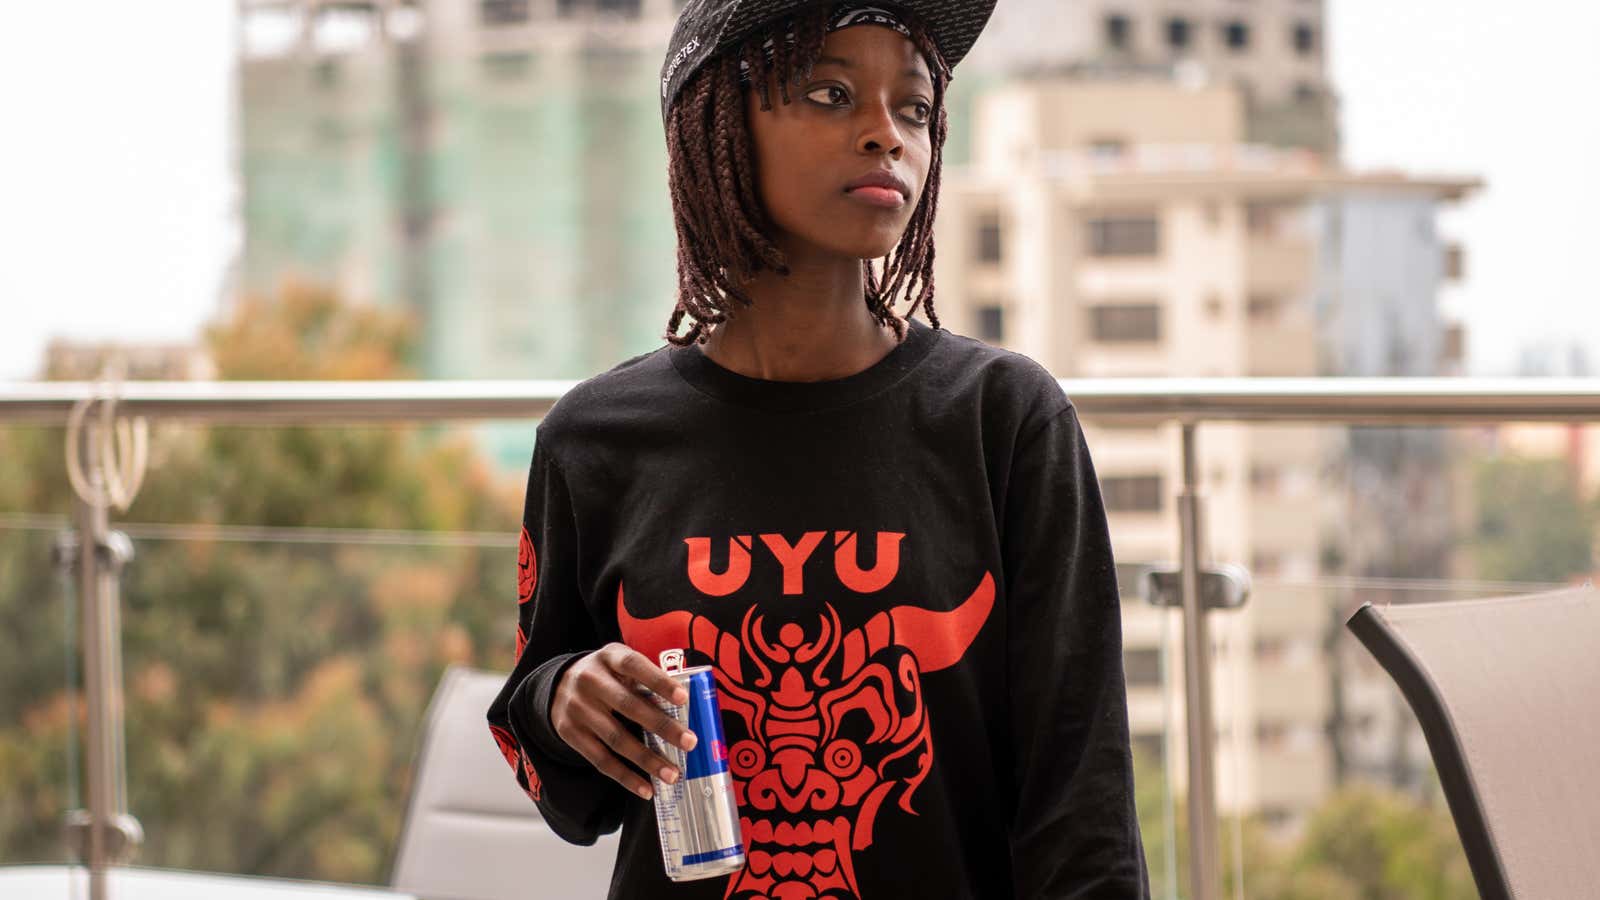 “Queen Arrow” is one of Kenya’s top esports gamers and has been signed on to UYU, one of the best esports teams in the fighting game community.